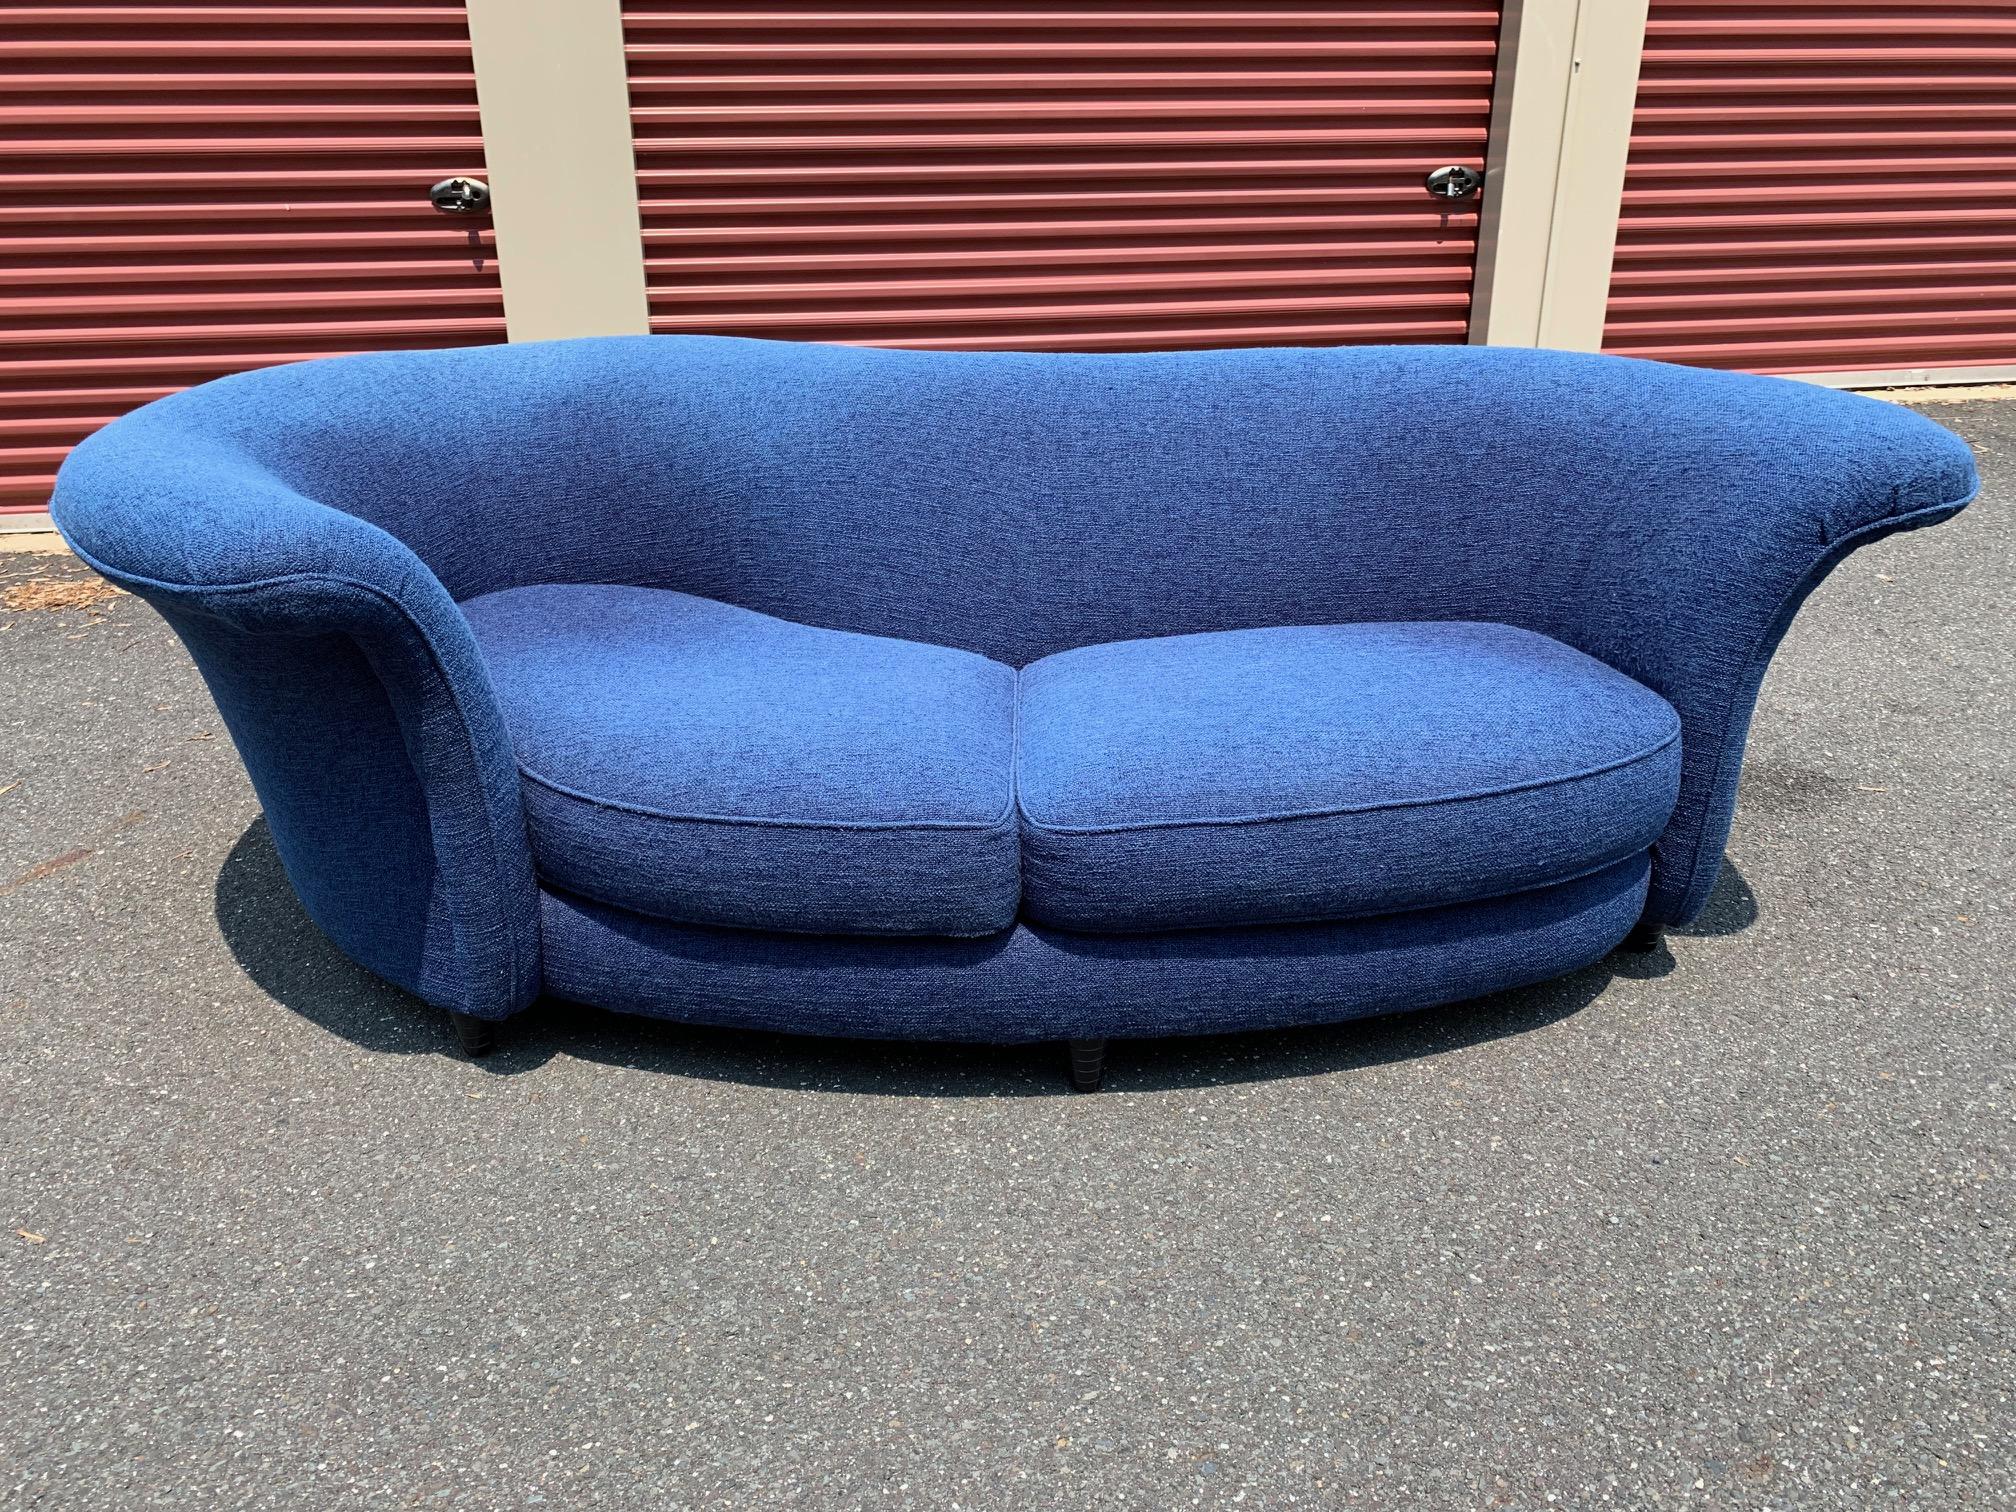 A curvy sculptural serpentine sofa. From the Prodigy line by Thayer Coggin no longer in production, this dramatically shaped sofa features a shelter style frame designed to nest your body maximizing comfort. 
The top of the sofa features a flare